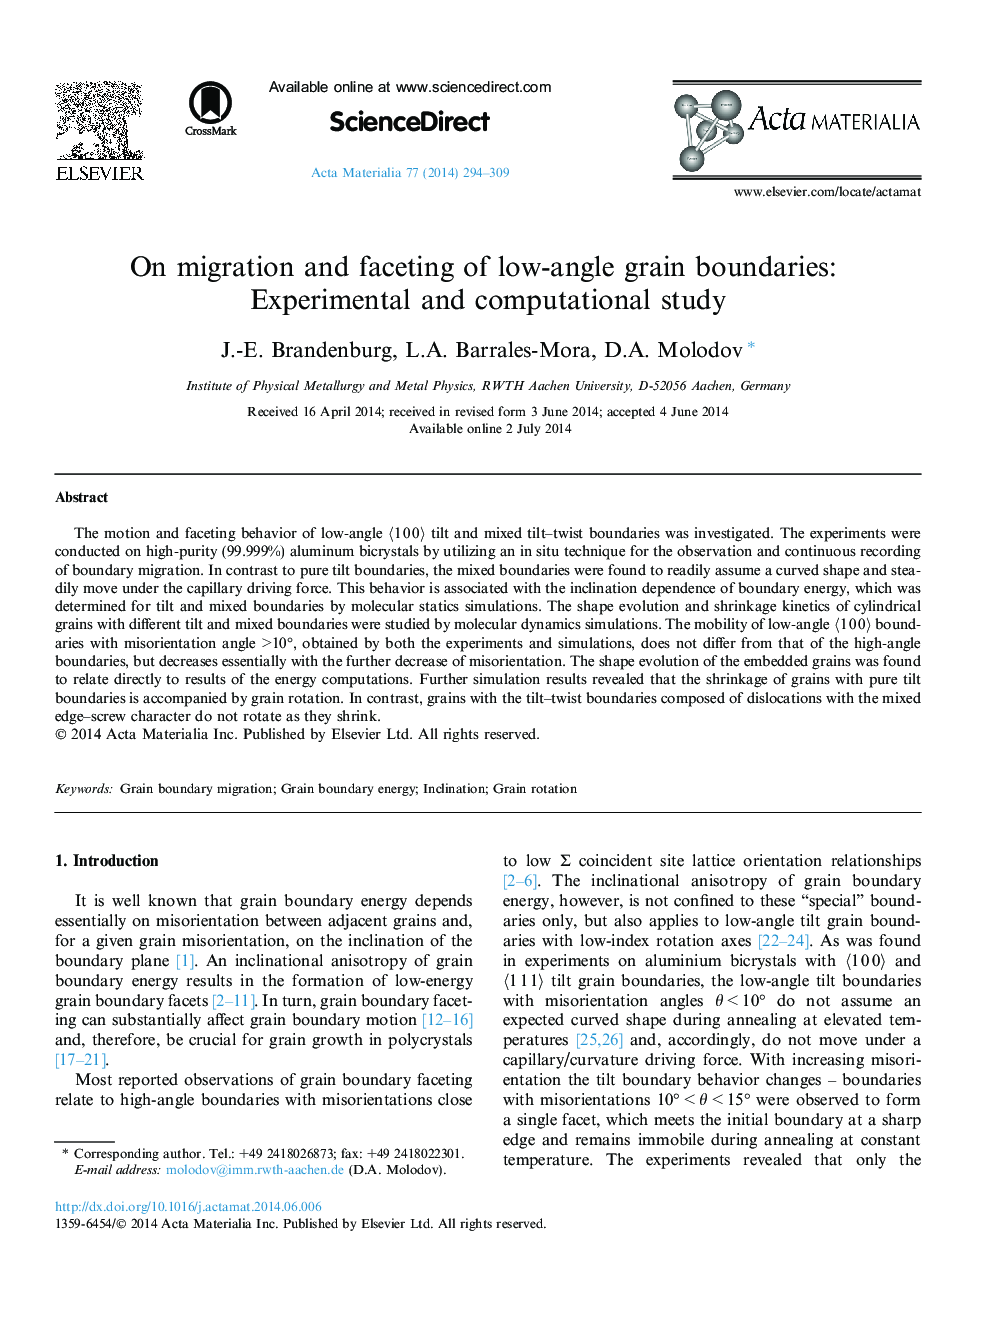 On migration and faceting of low-angle grain boundaries: Experimental and computational study